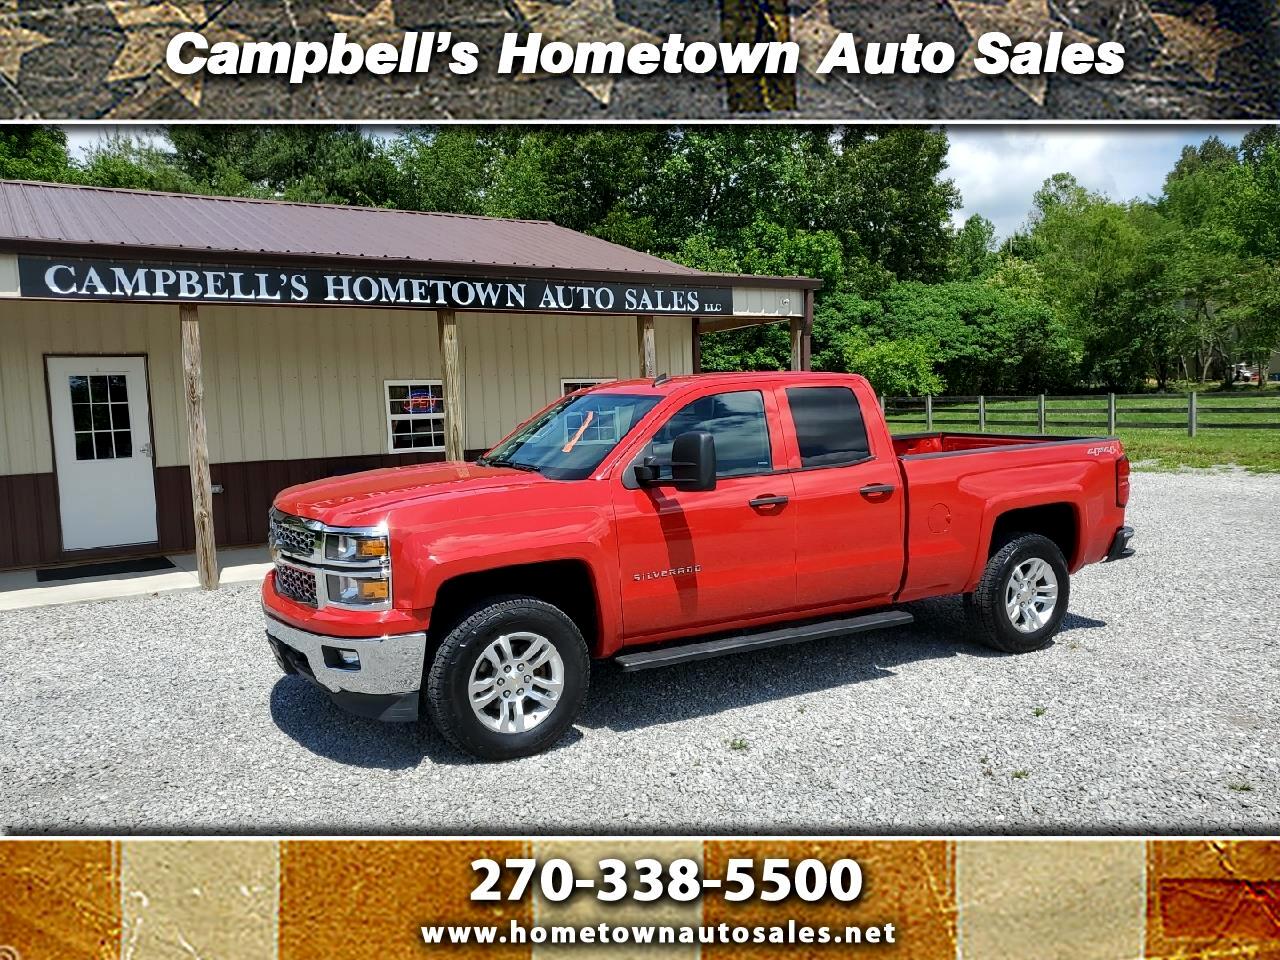 Used 14 Chevrolet Silverado 1500 2lt Double Cab 4wd For Sale In Powderly Ky Campbell S Hometown Auto Sales